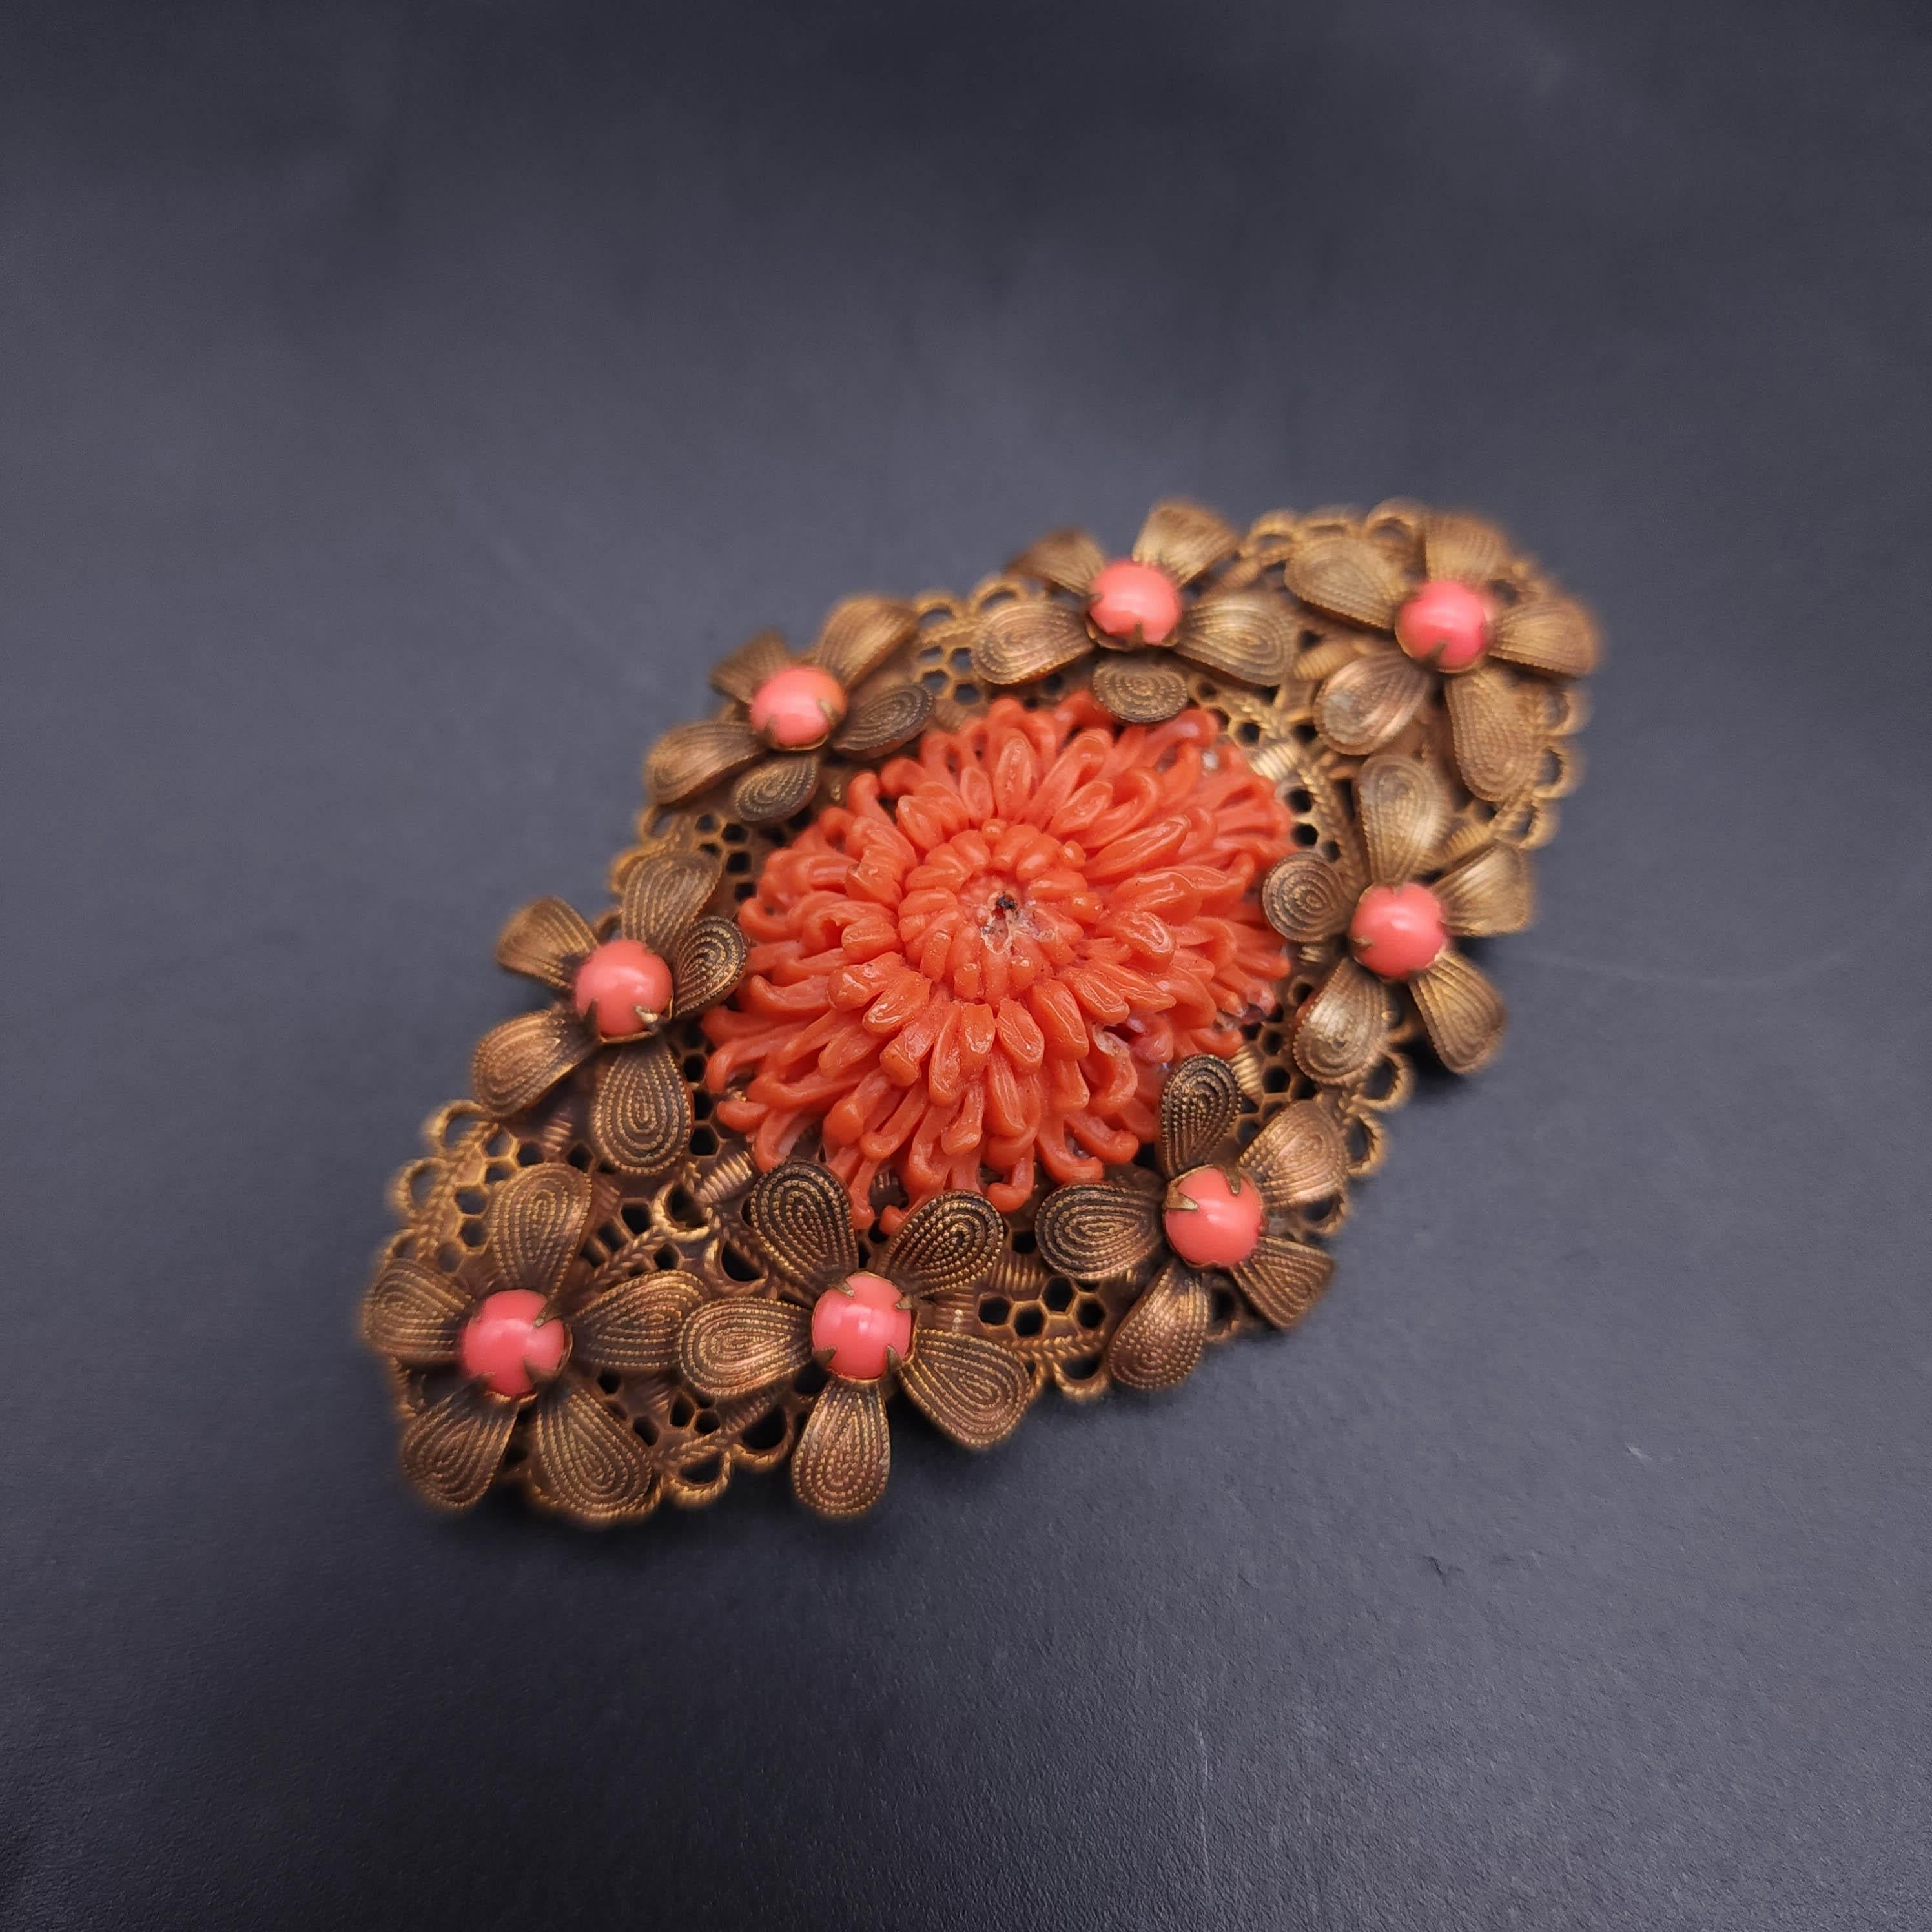 Discover the charm of vintage elegance with the antique floral brass pin, featuring a beautifully carved faux coral flower centerpiece. This exquisite pin is a testament to classic craftsmanship, adorned with intricate flower accents encircling the